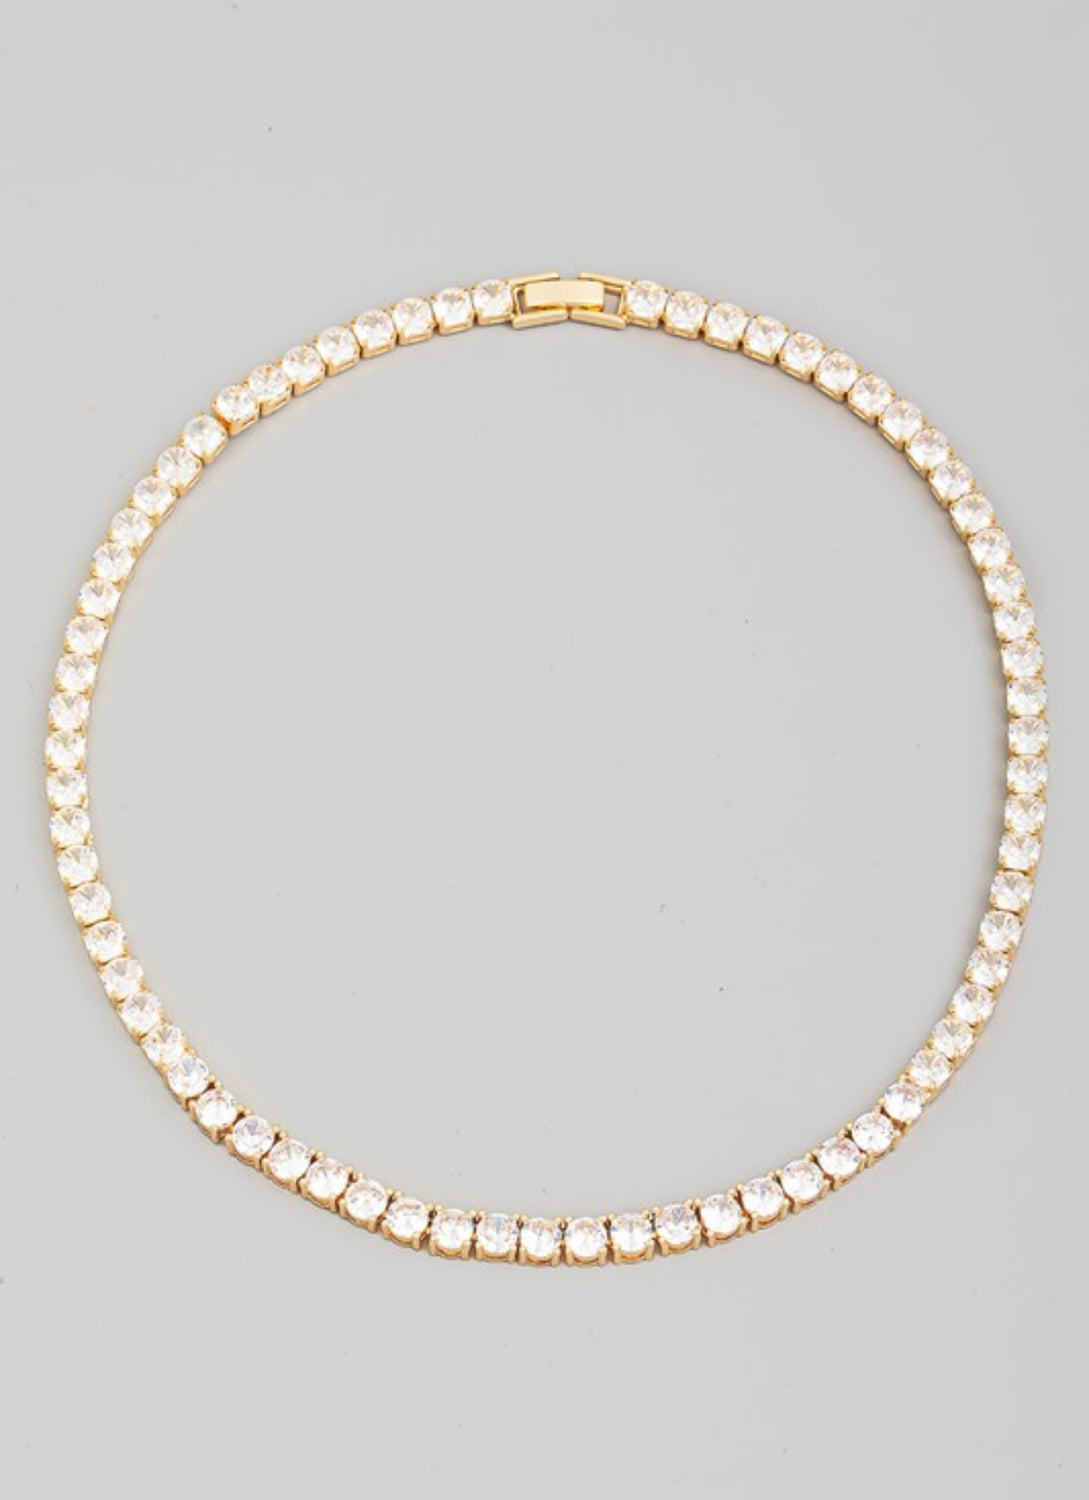 Tennis Necklace - Gold